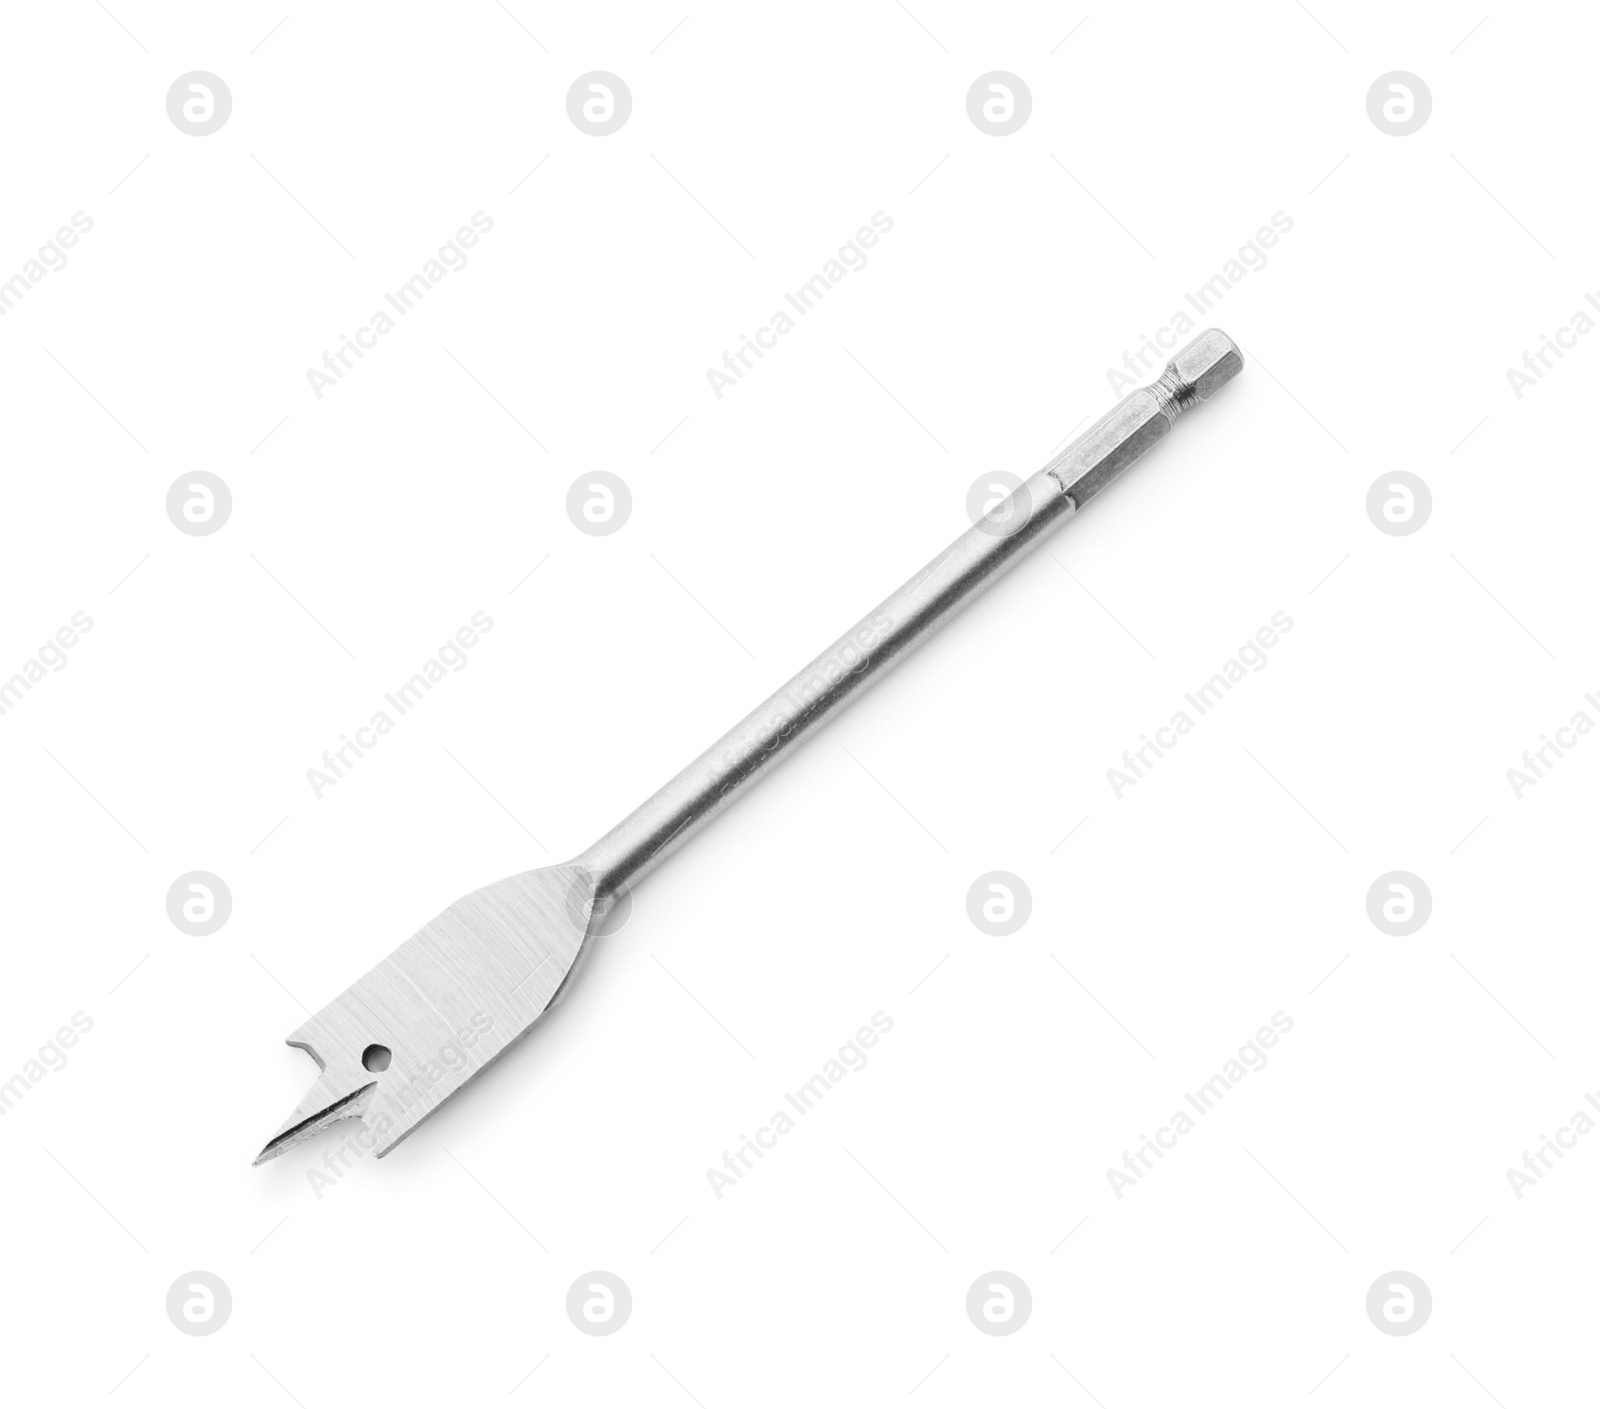 Photo of Spade drill bit isolated on white, top view. Carpenter's tool